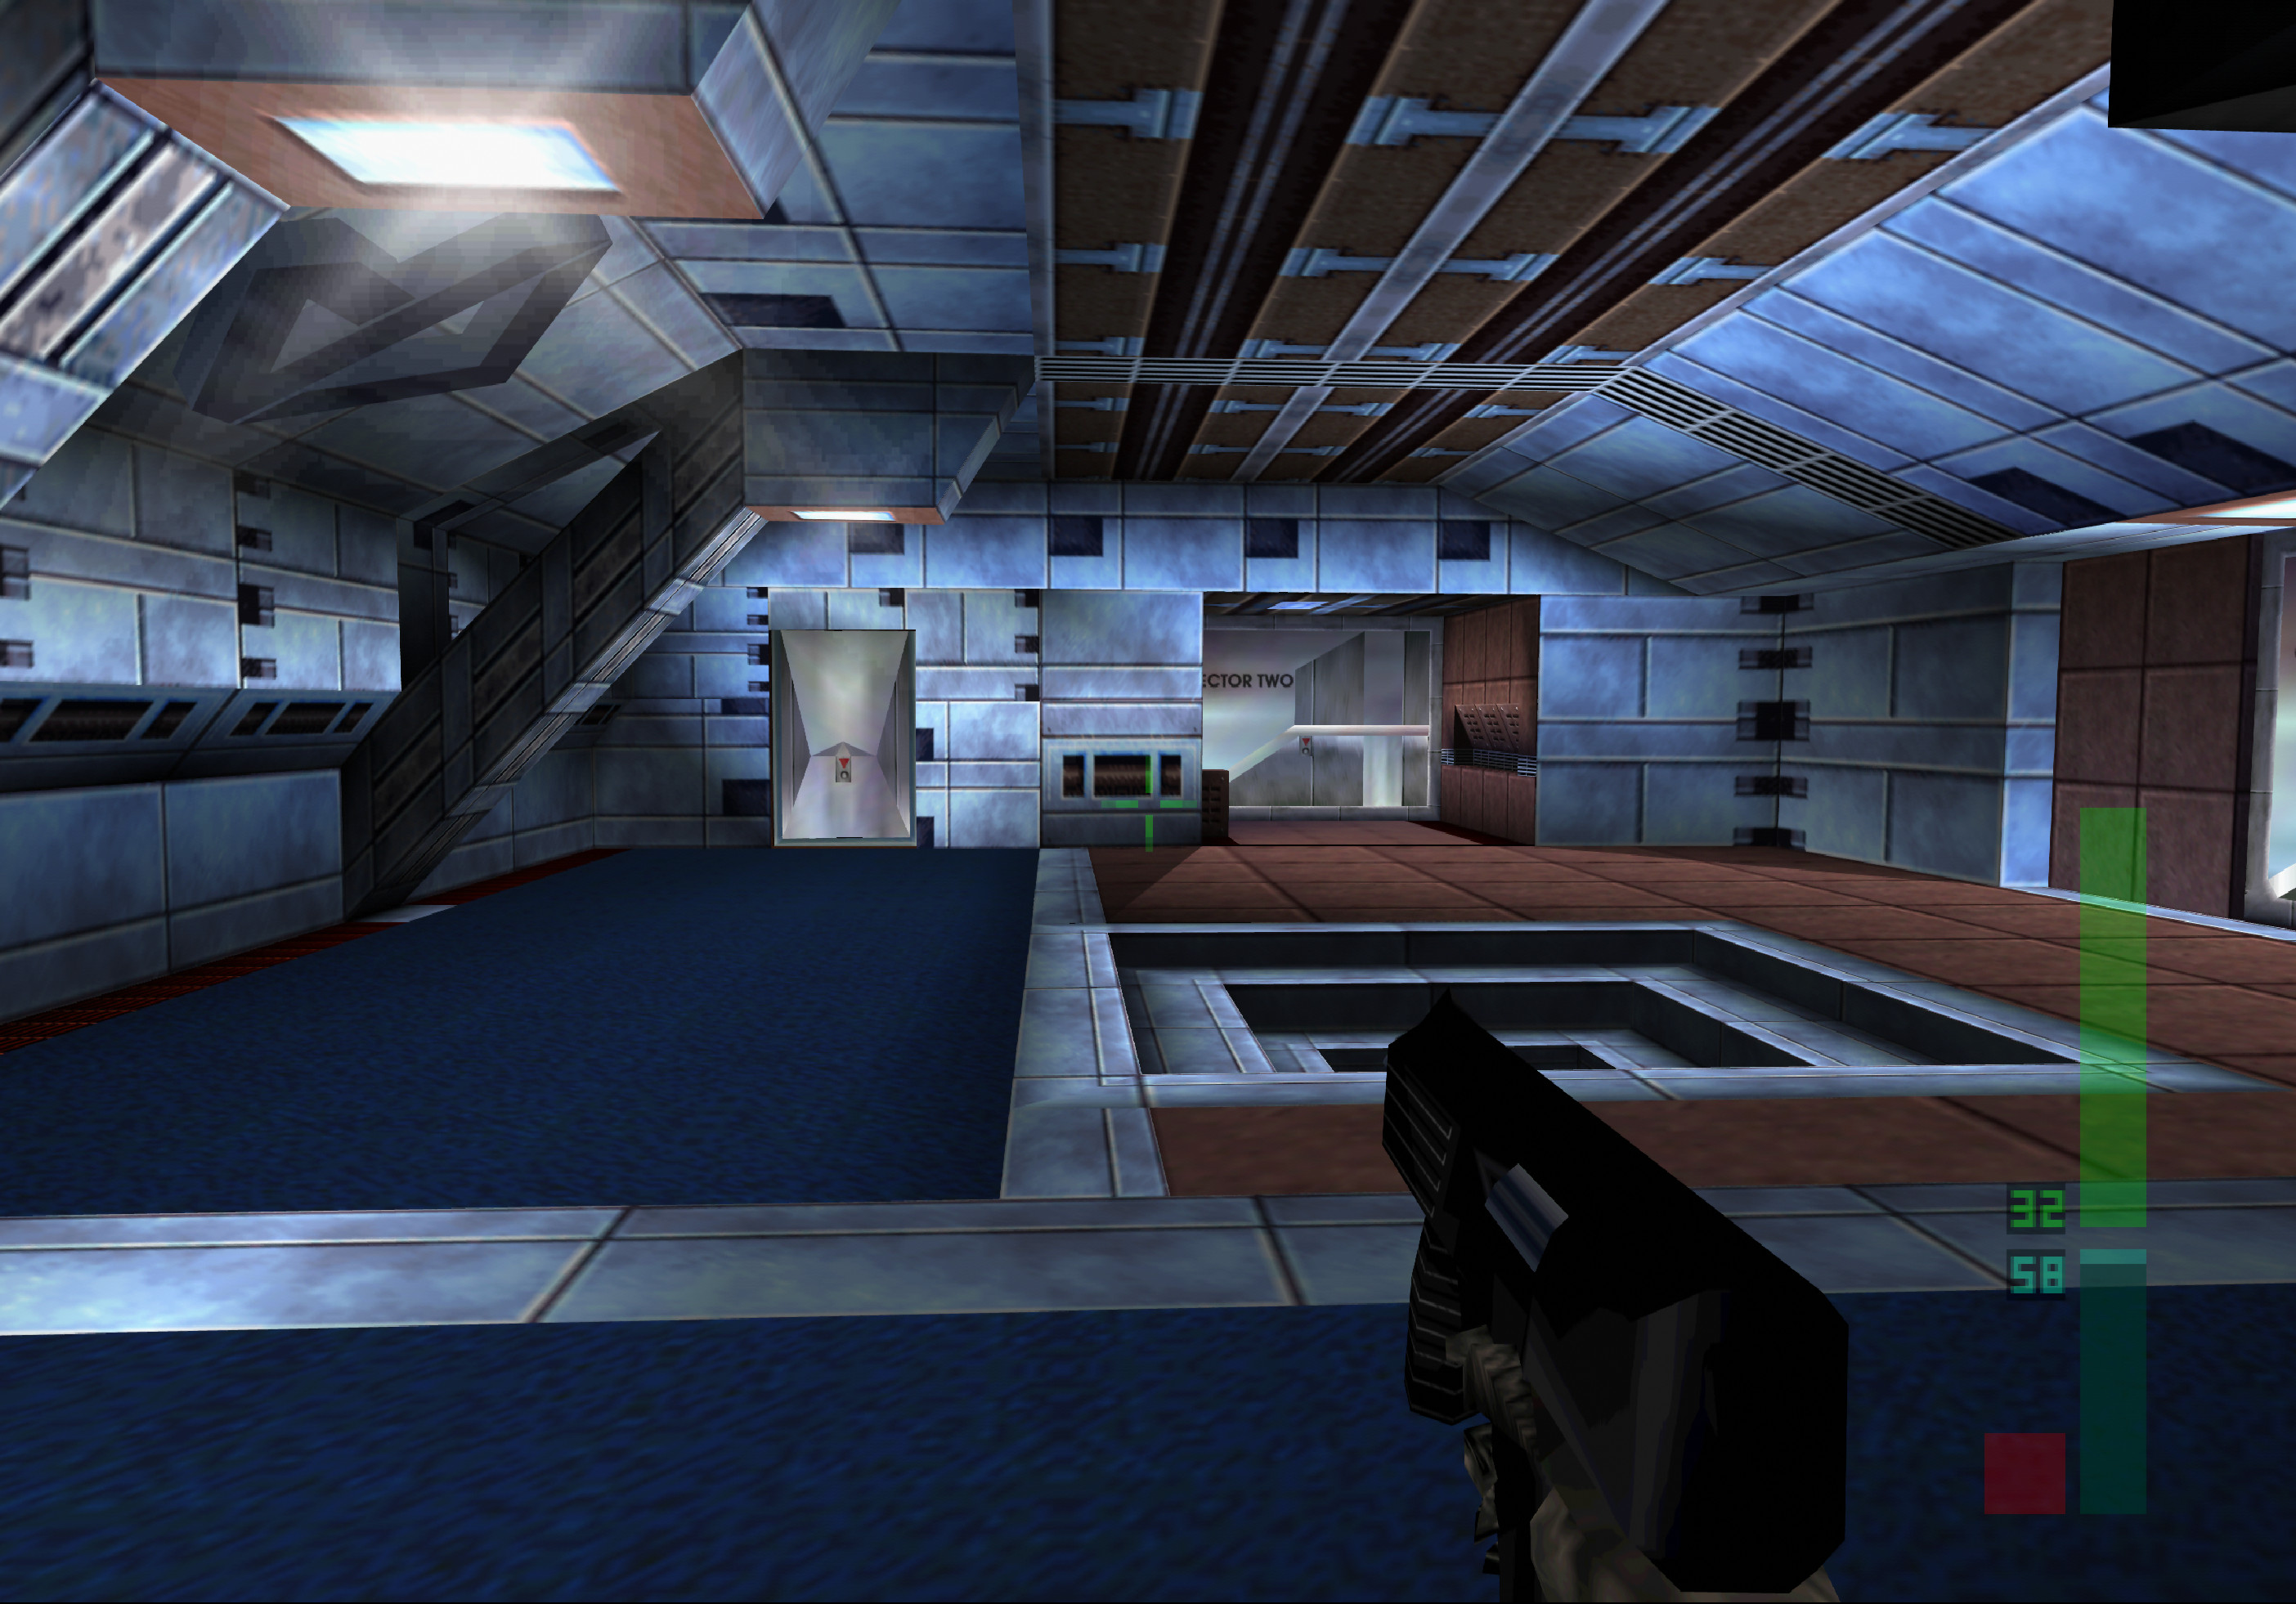 Perfect Dark running on ParaLLEl RDP with 8x internal upscale in high-res mode